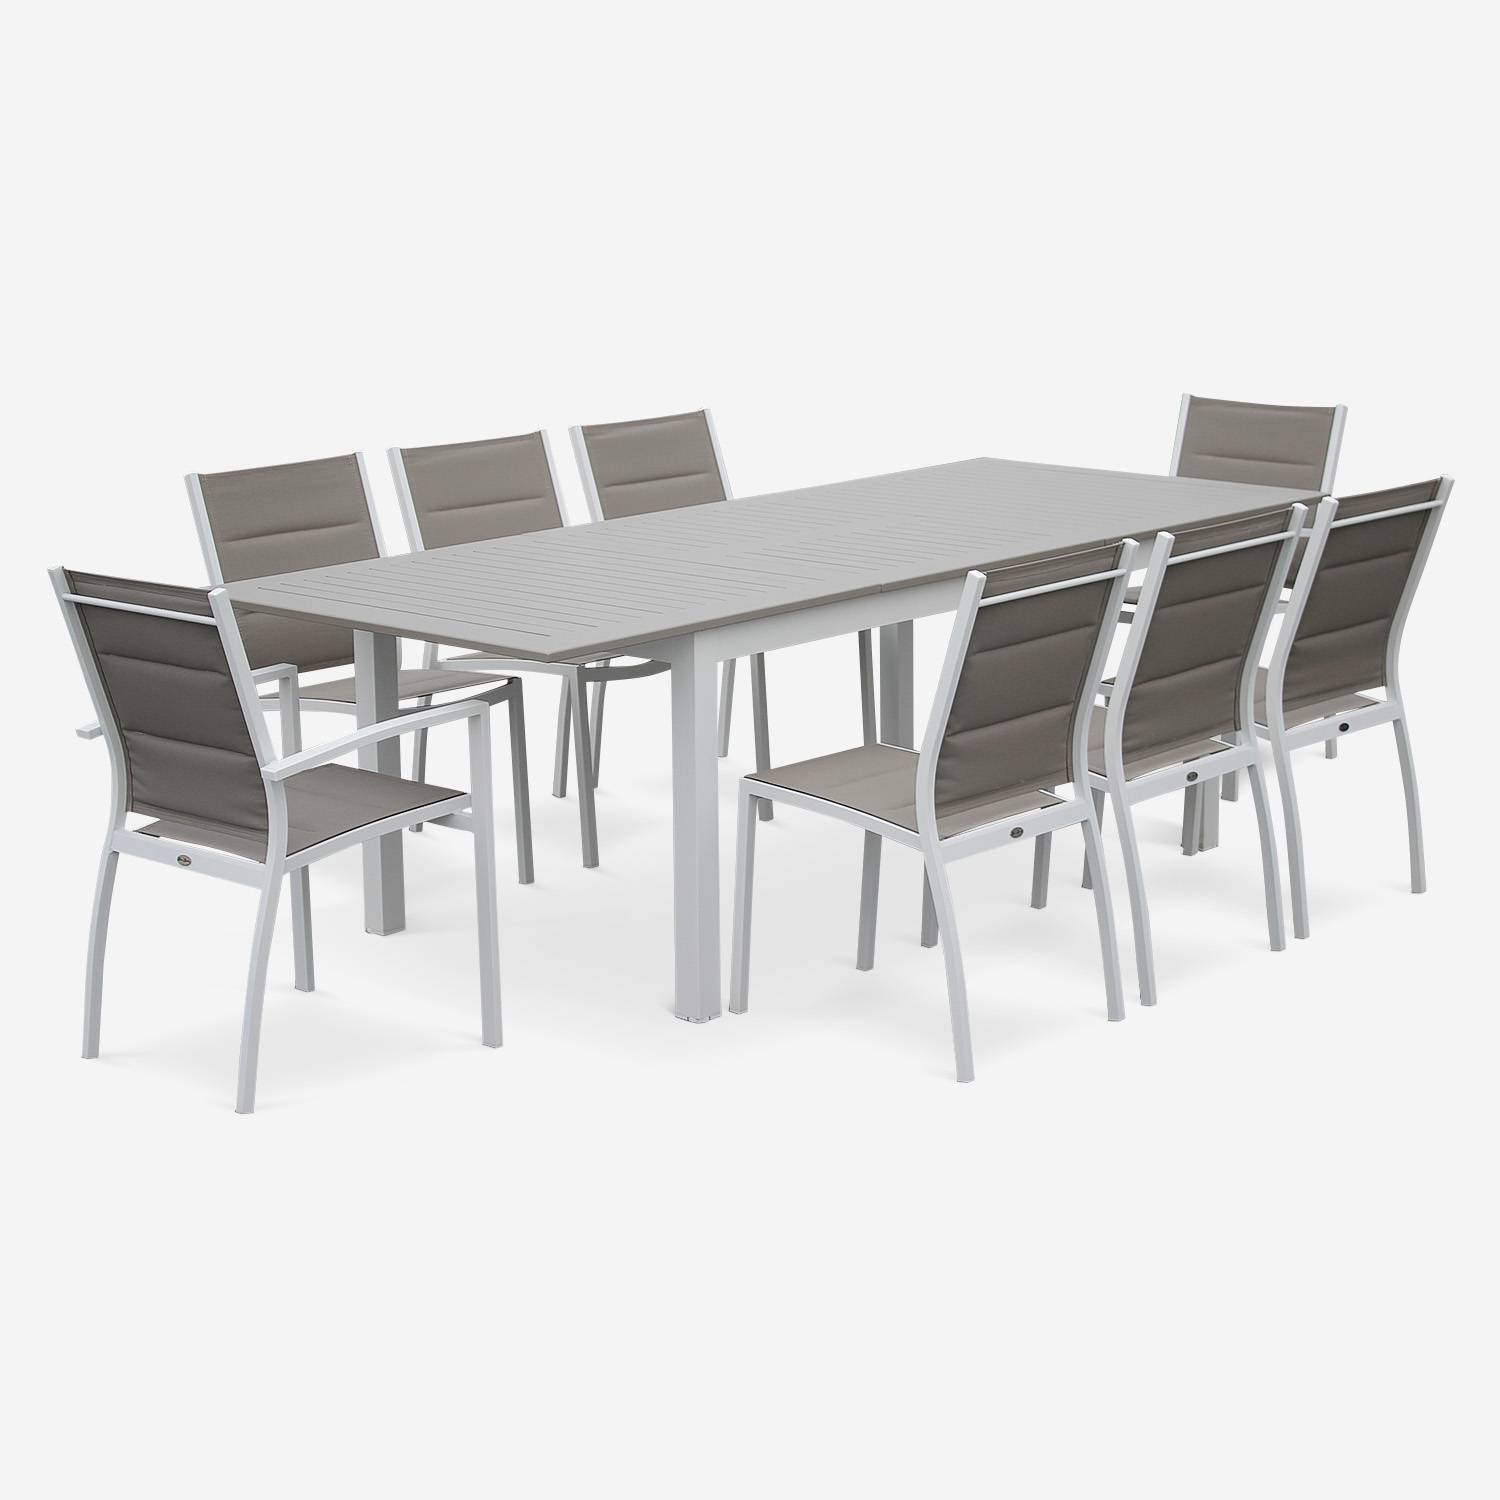 8-seater garden dining set, extendable 175-245cm aluminium table, 6 chairs and 2 armchairs - Chicago 8 - White frame, Beige-Brown textilene,sweeek,Photo2